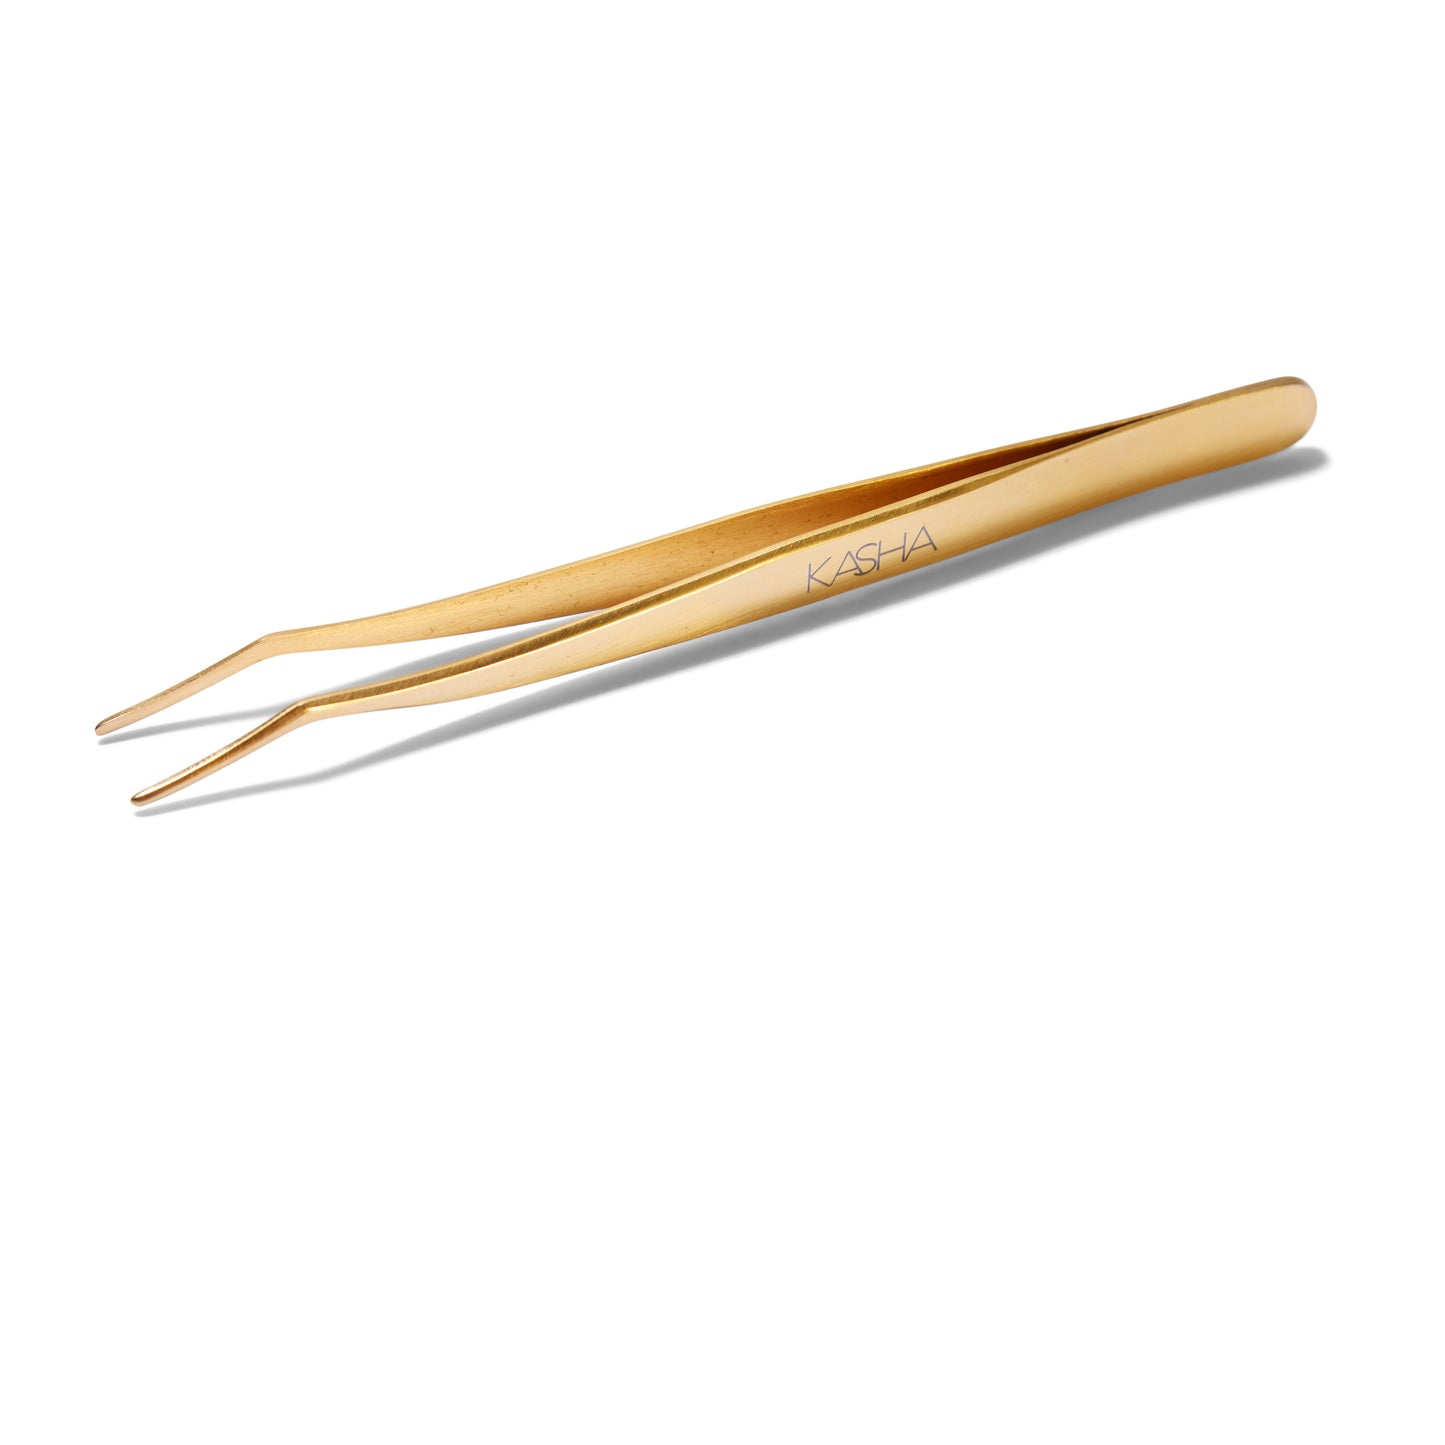 Side view of the gold Kasha Eyelash Applicator. The applicator is gold and the tip is angled.